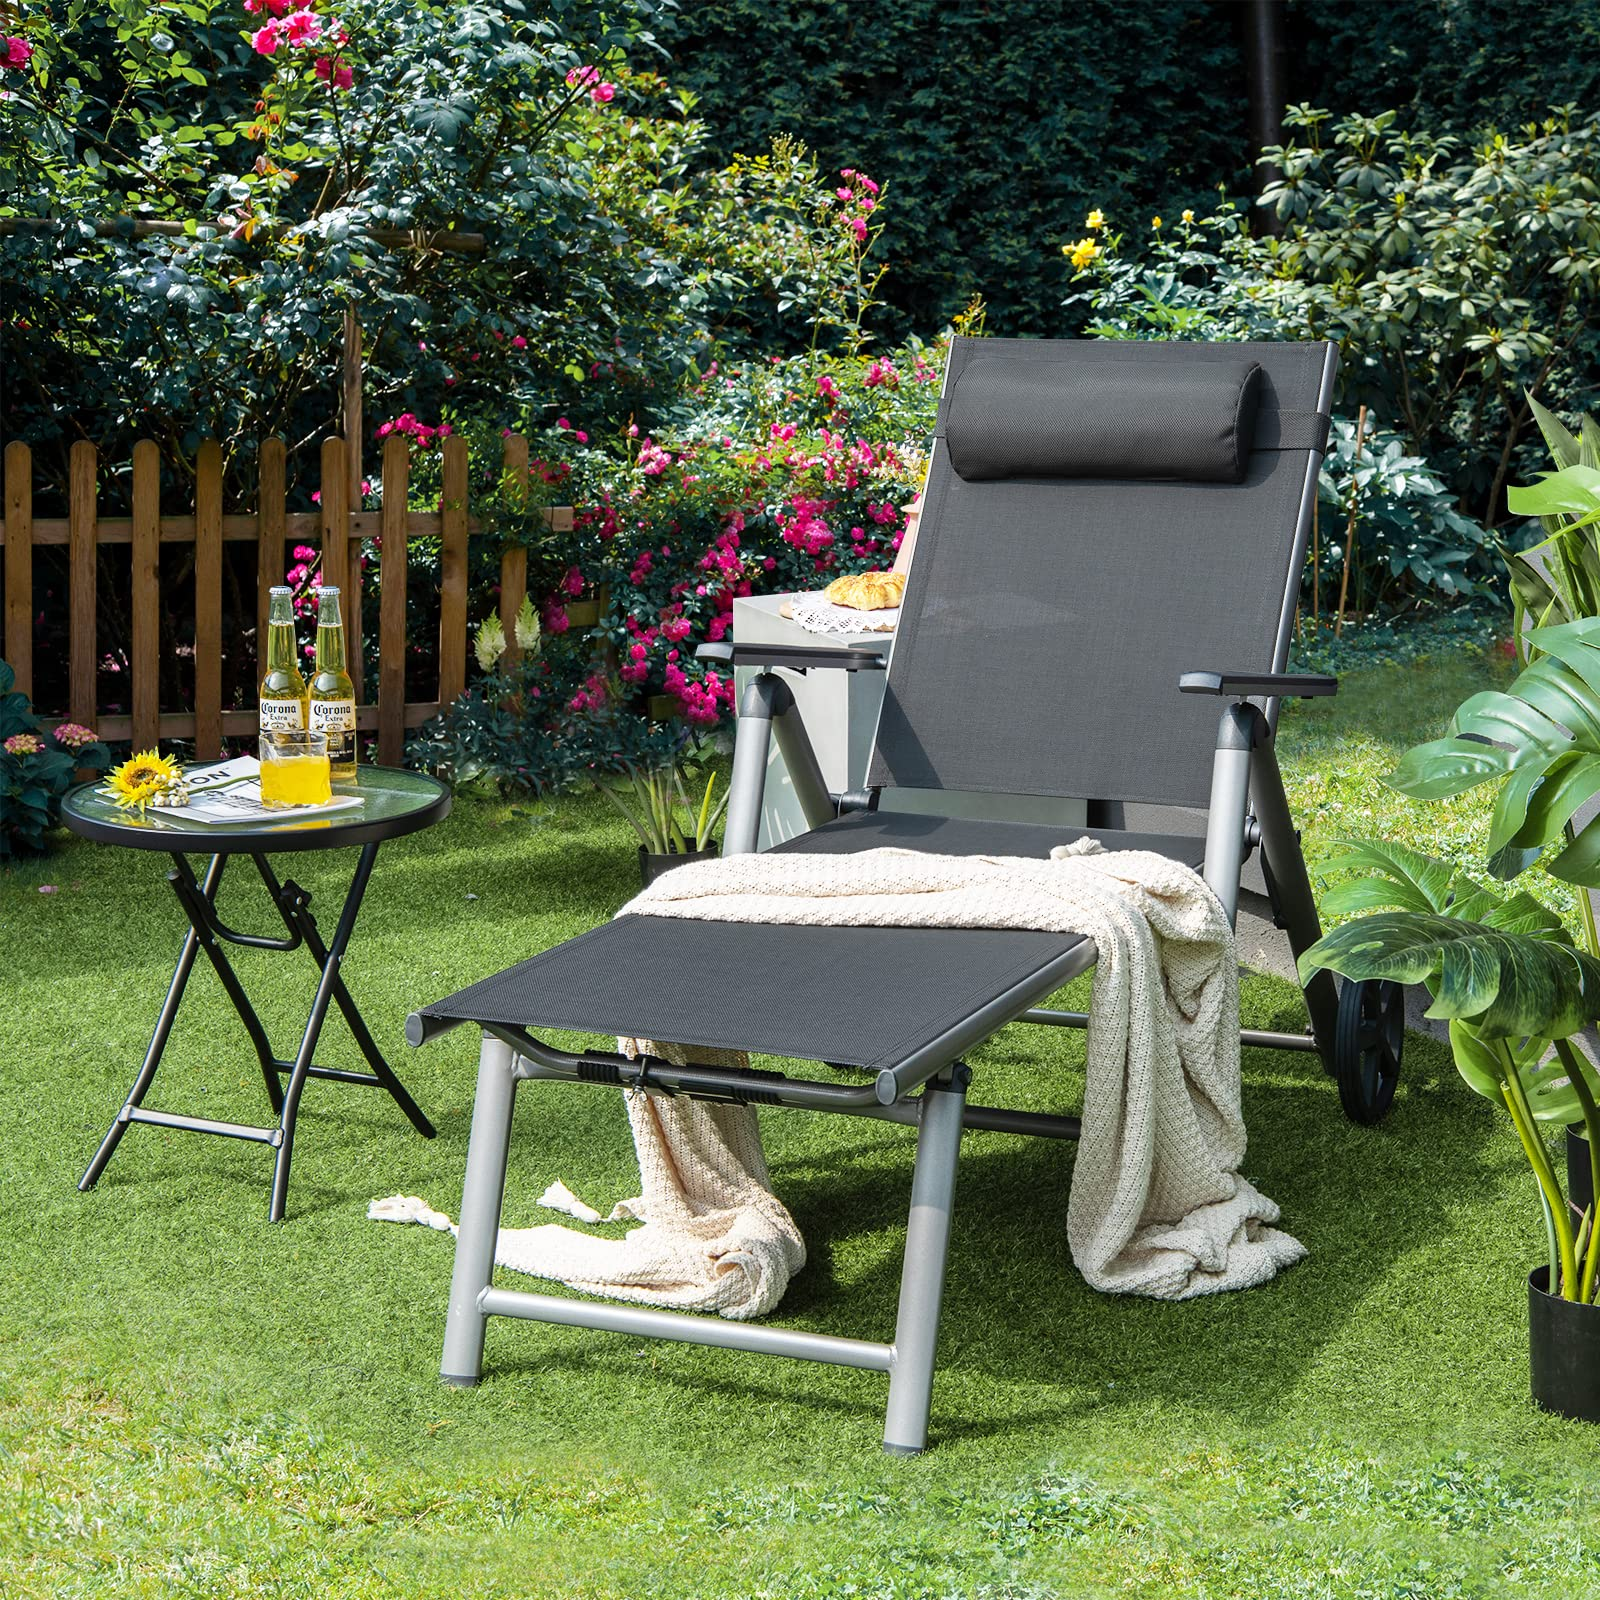 Giantex Chaise Lounge Outdoor Chair- Patio Folding Lounge Chair with Wheels, 7 Adjustable Level